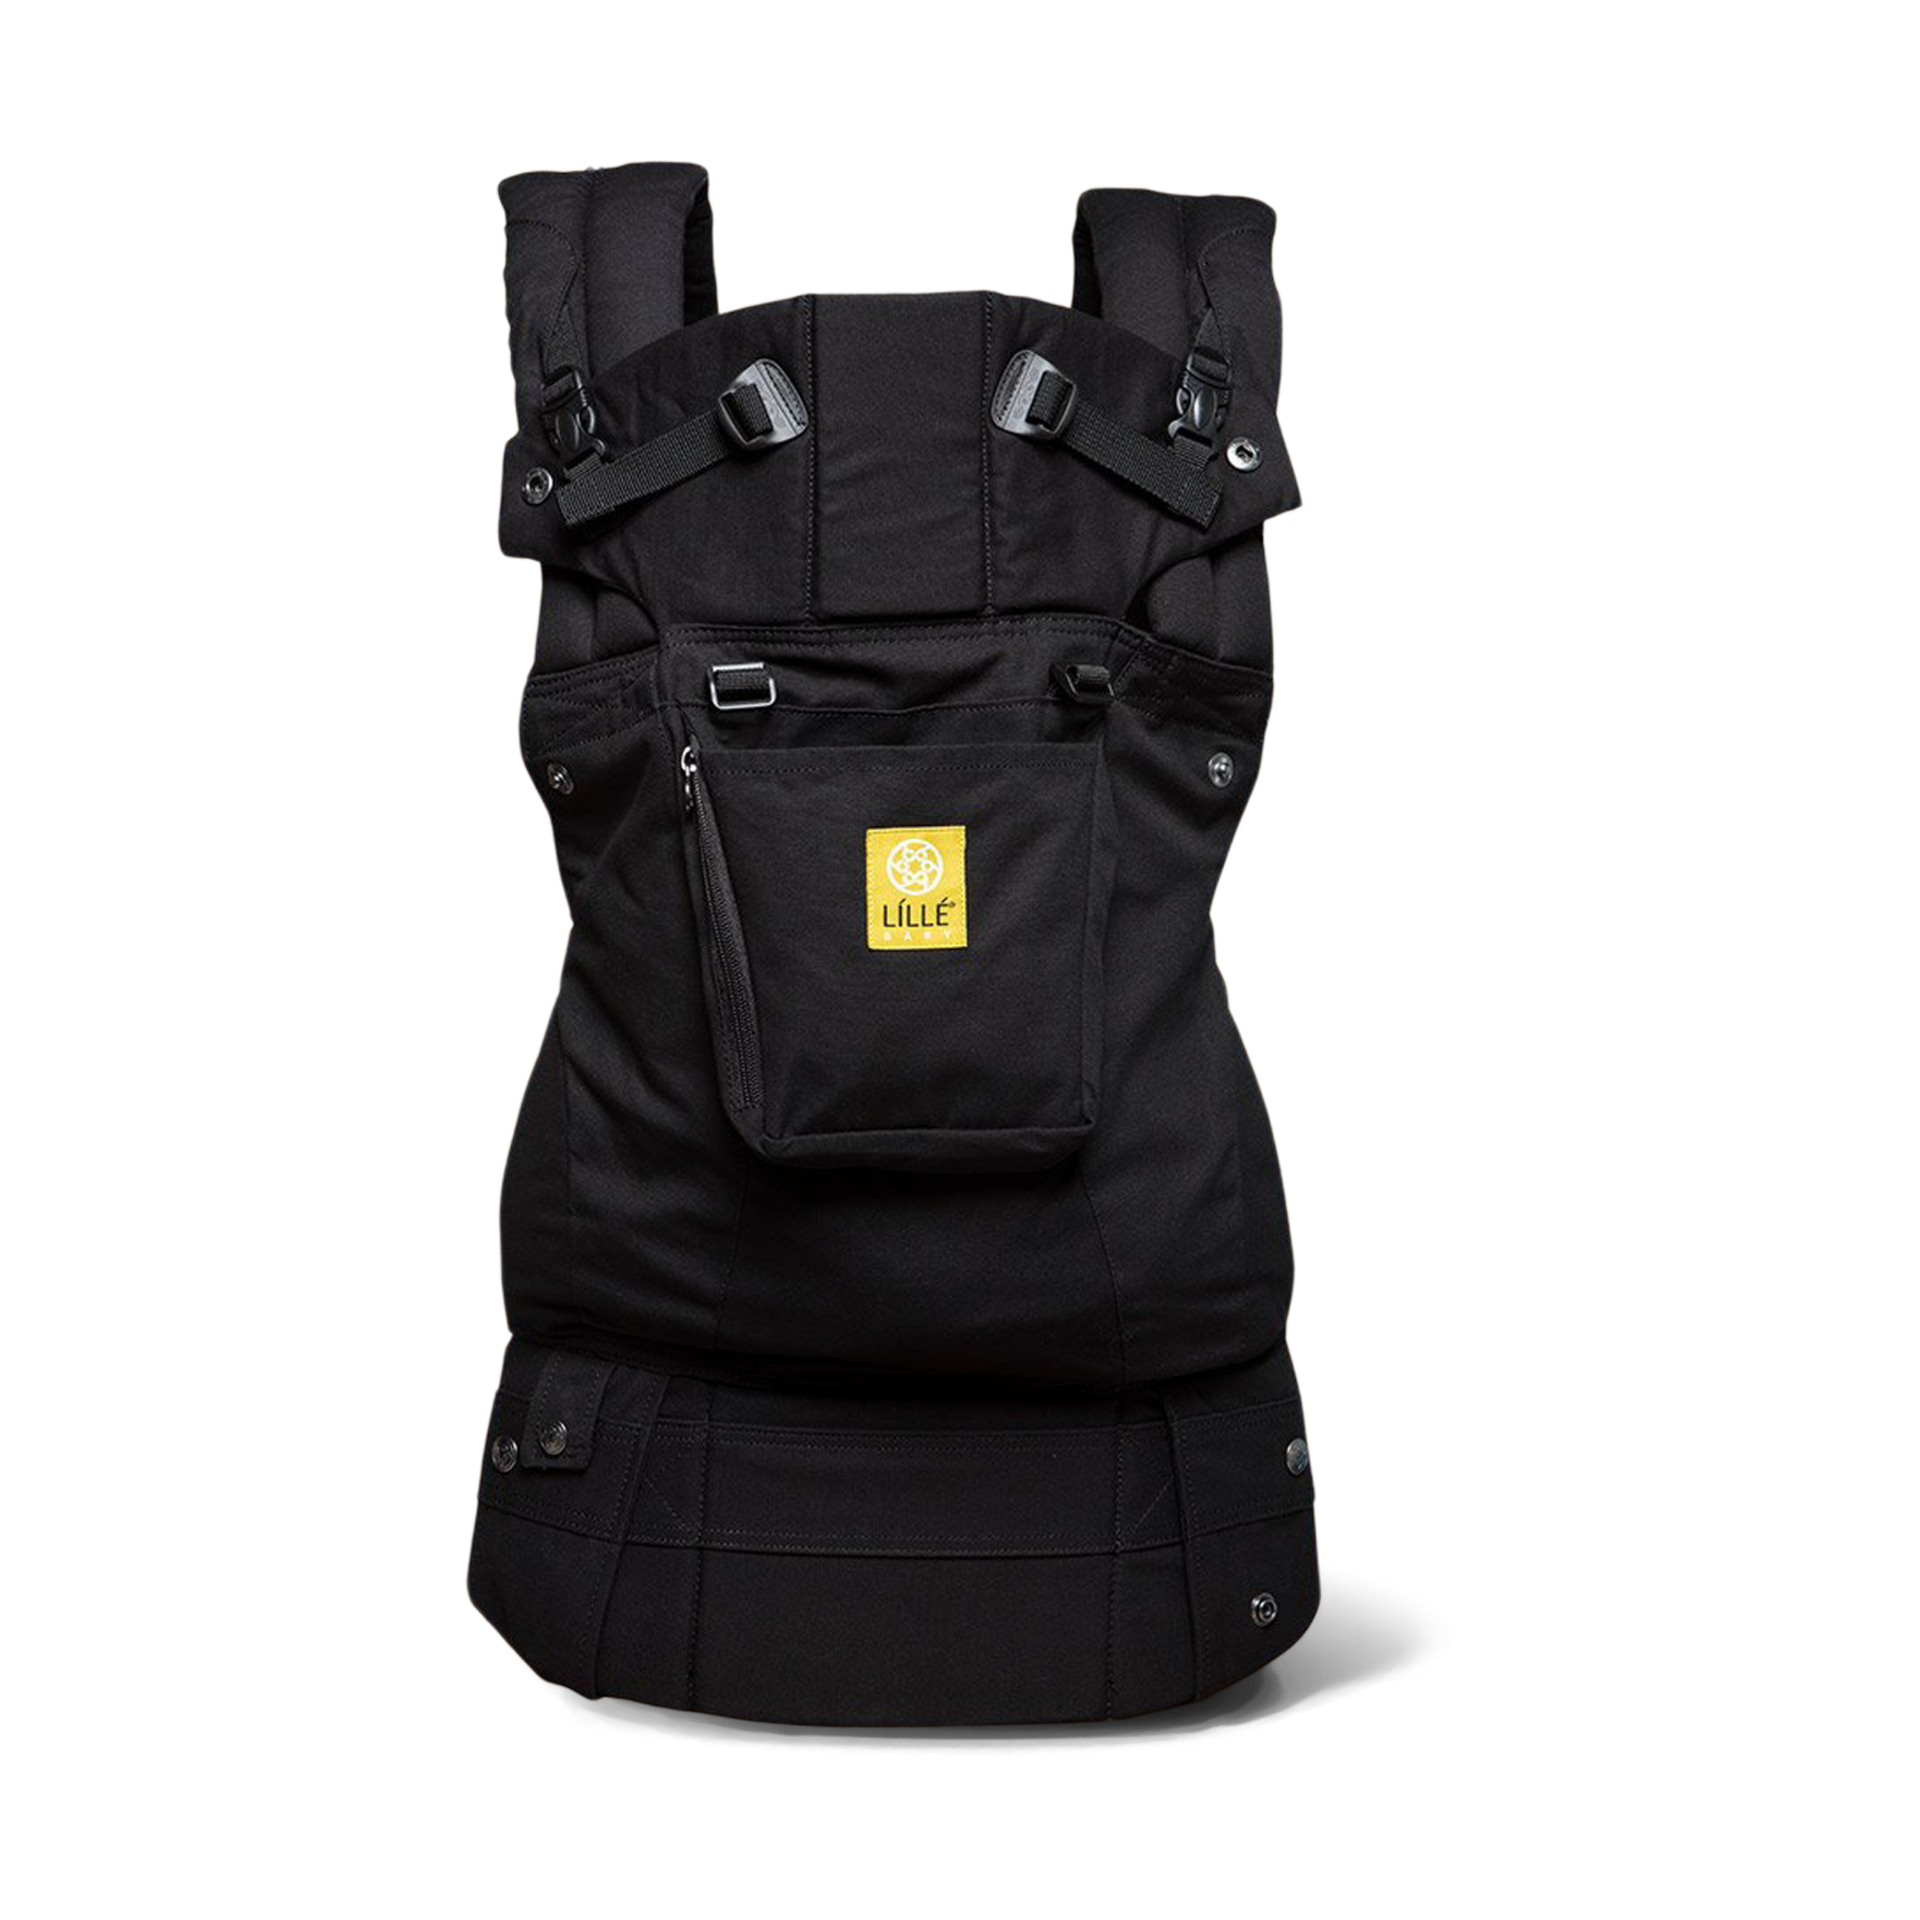 lillebaby six position carrier